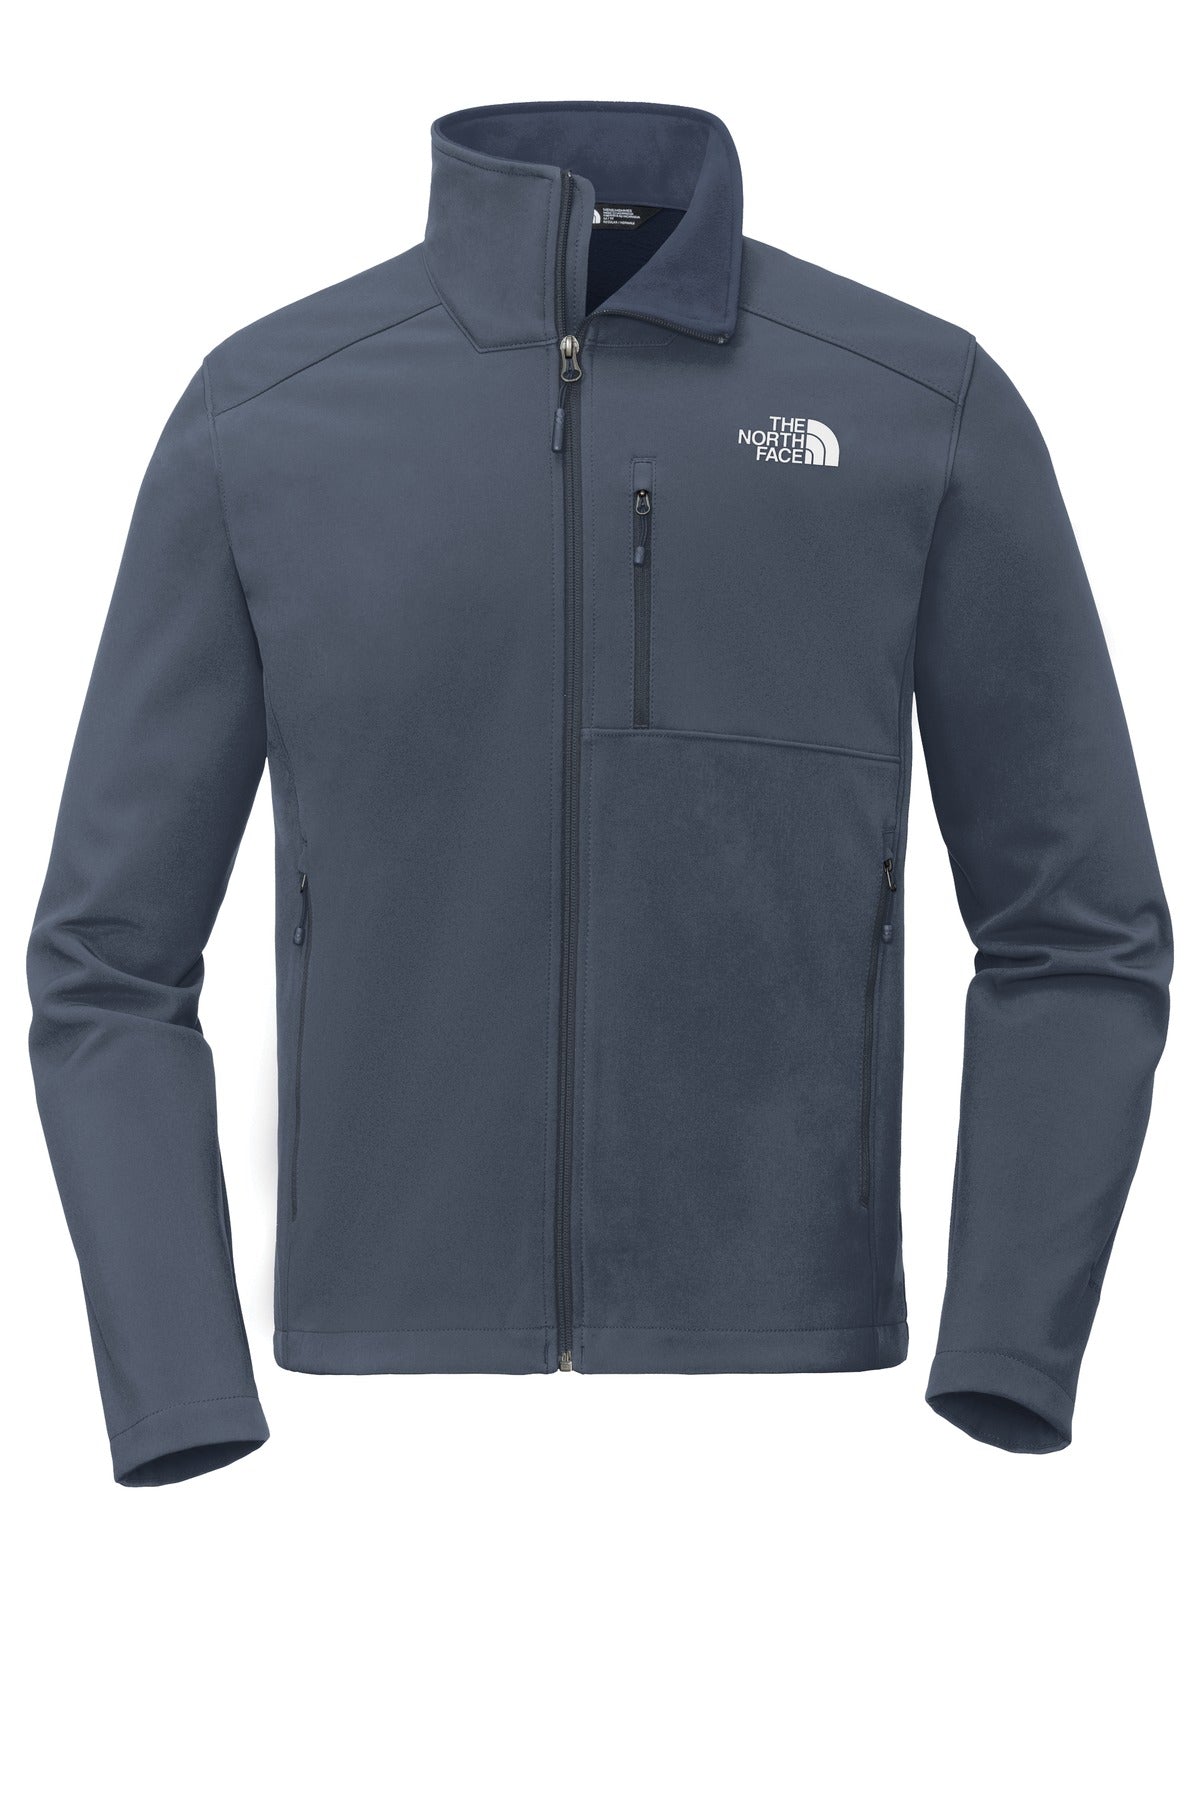 The North Face Apex Barrier Soft Shell Jacket. NF0A3LGT